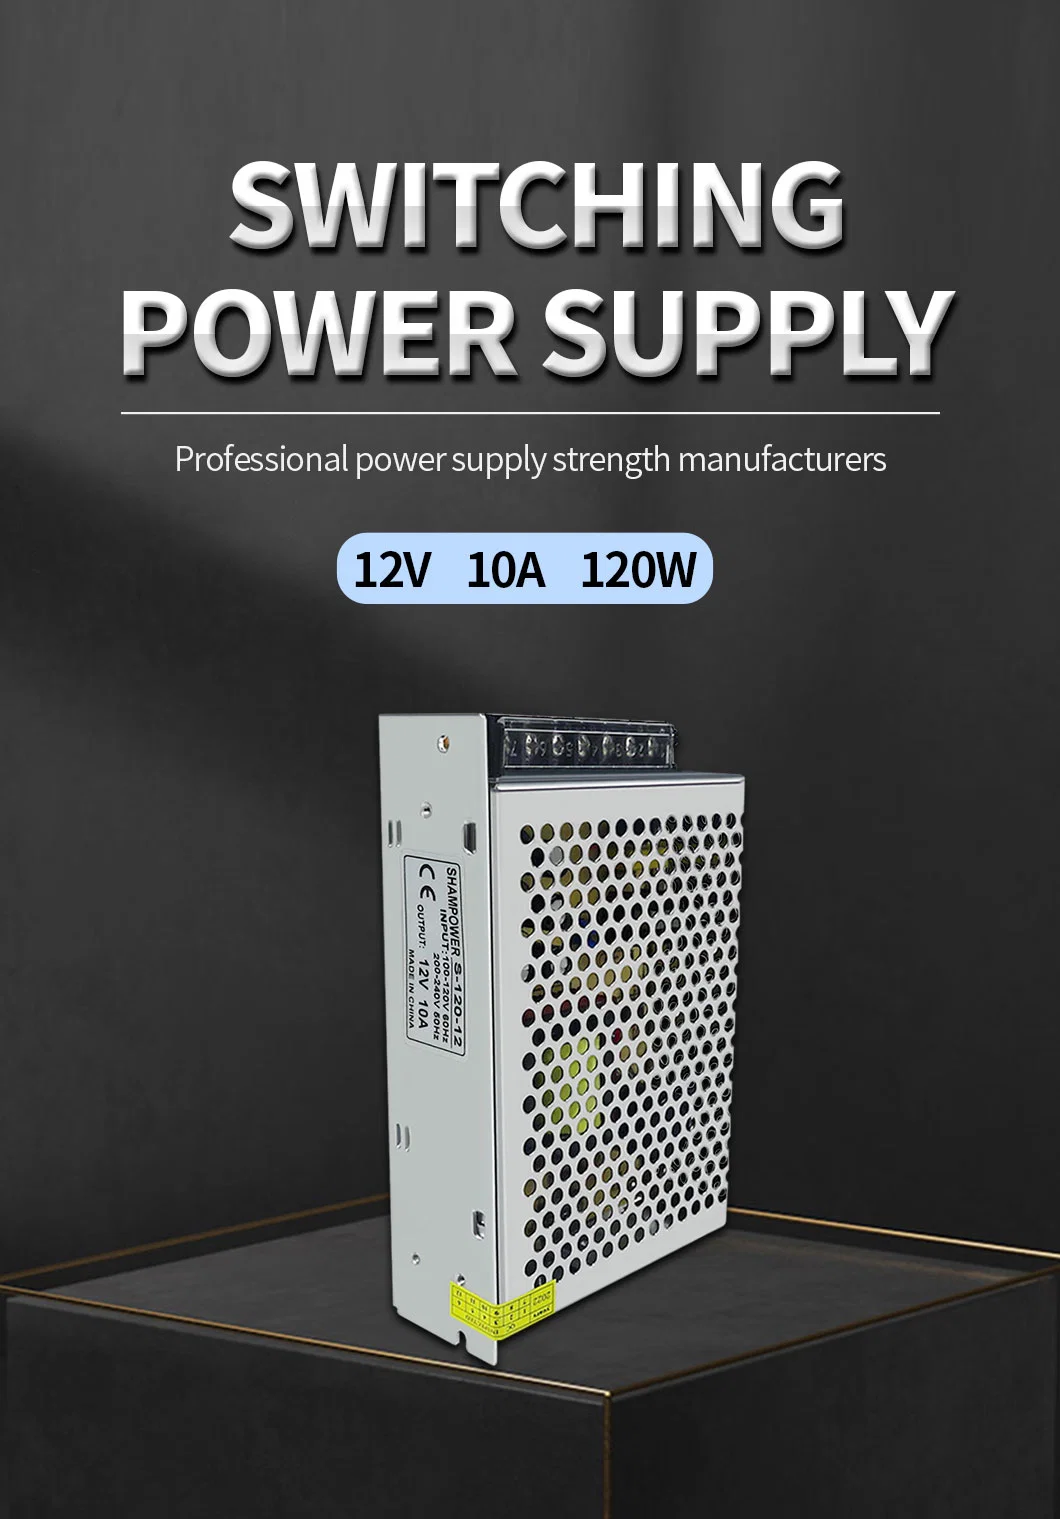 12V 10A 120W Switching Power Supply for LED Lighting